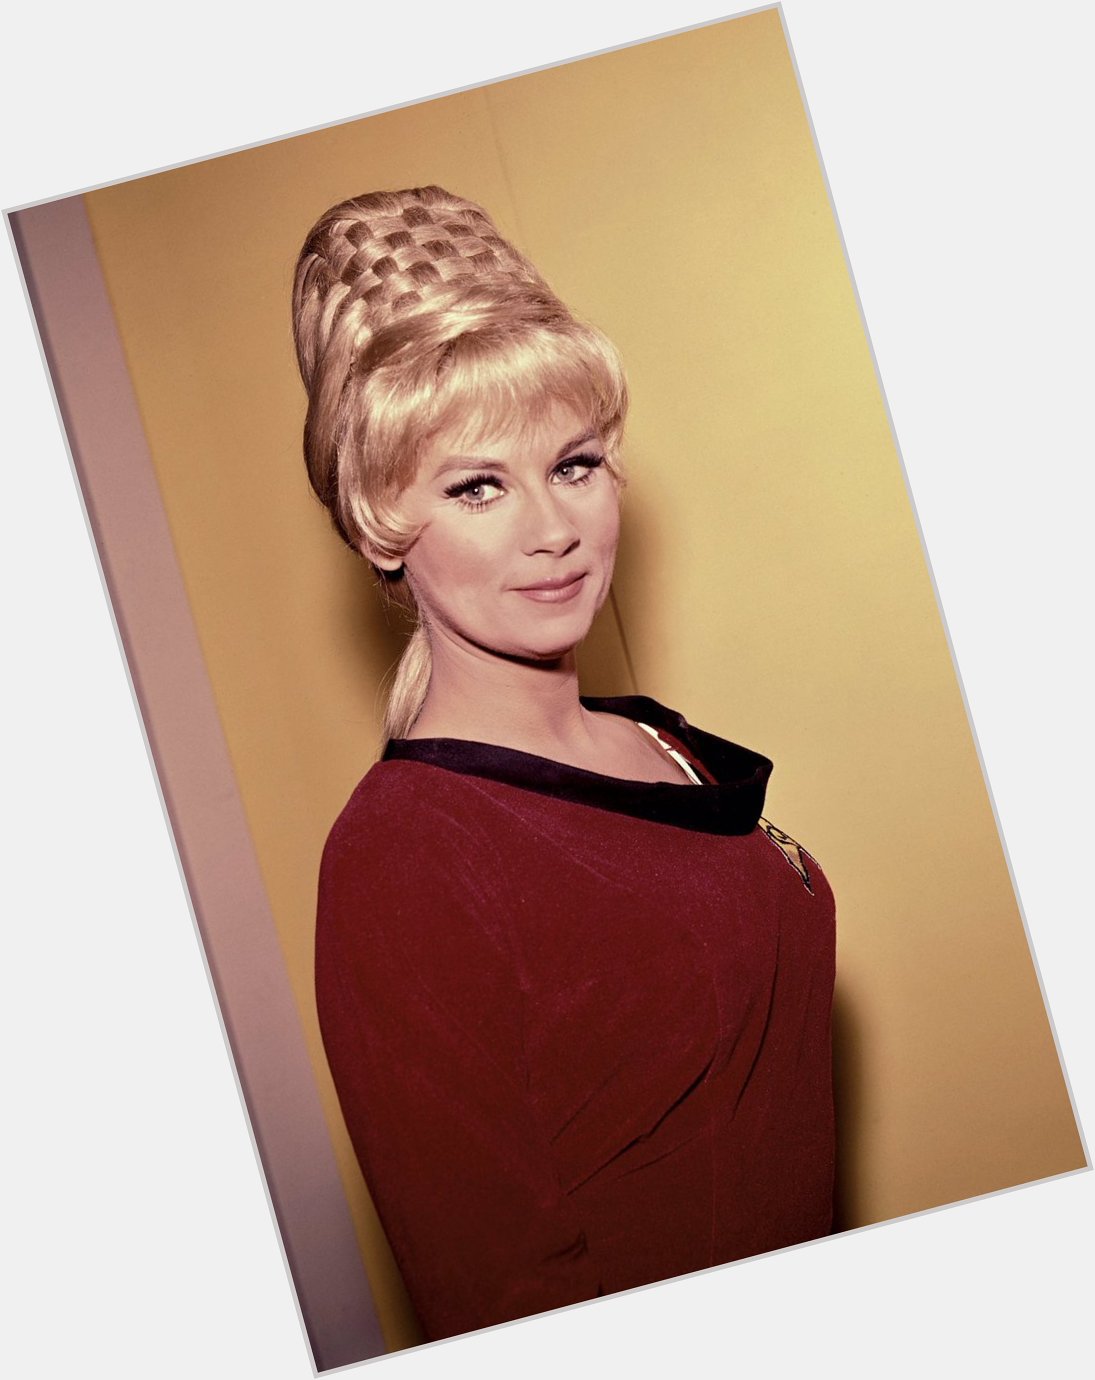 Happy heavenly birthday to Grace Lee Whitney who would have been 92 today!  